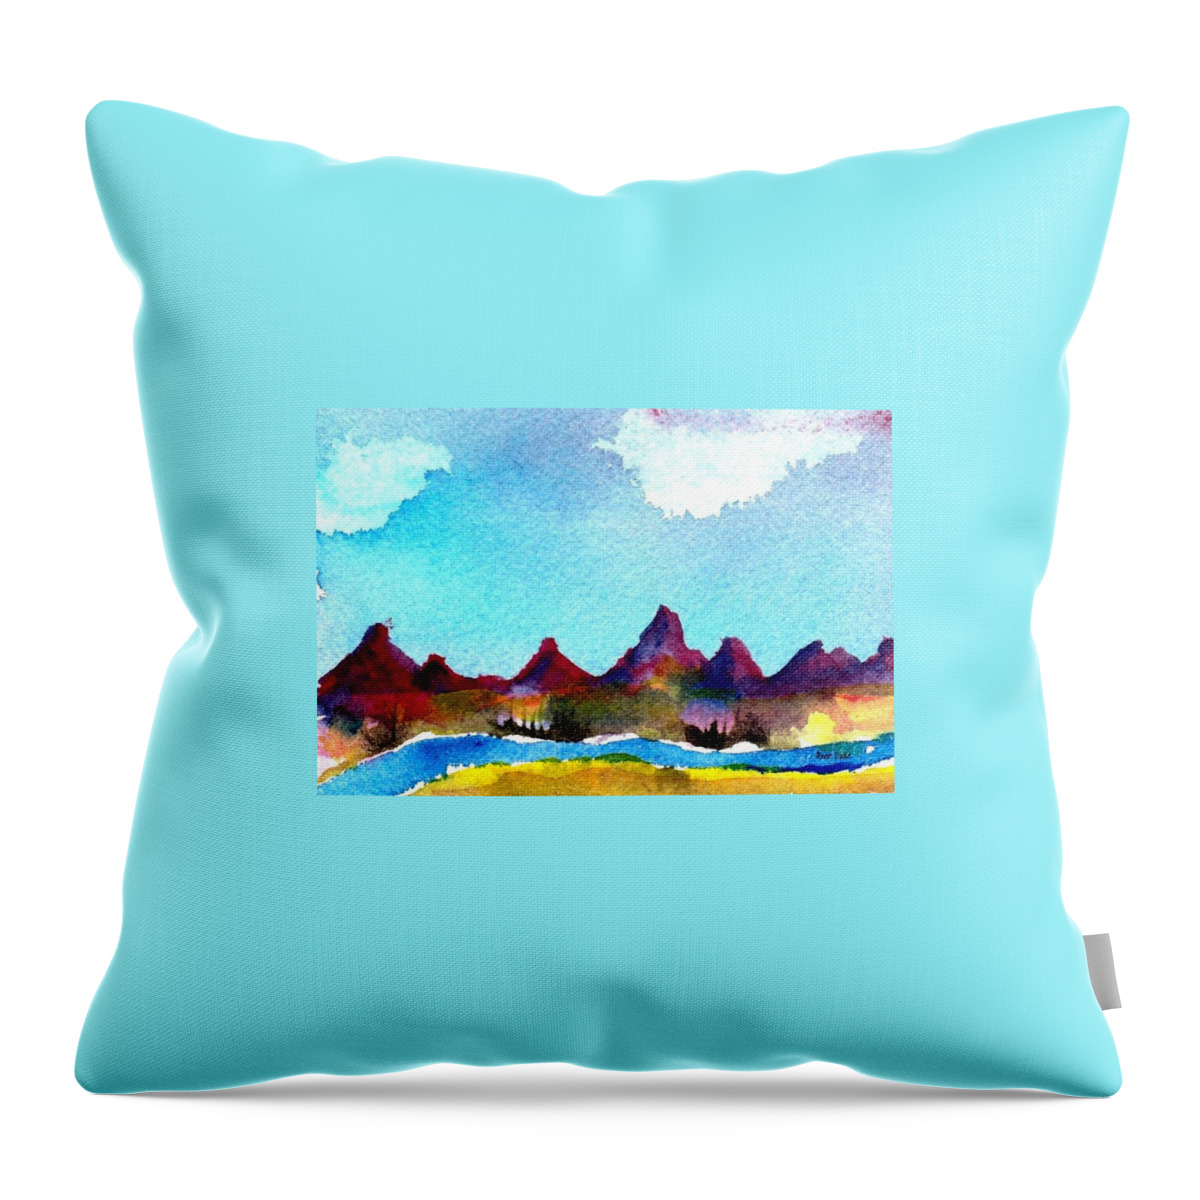 Watercolor Throw Pillow featuring the painting Needles Mountains by Anne Duke